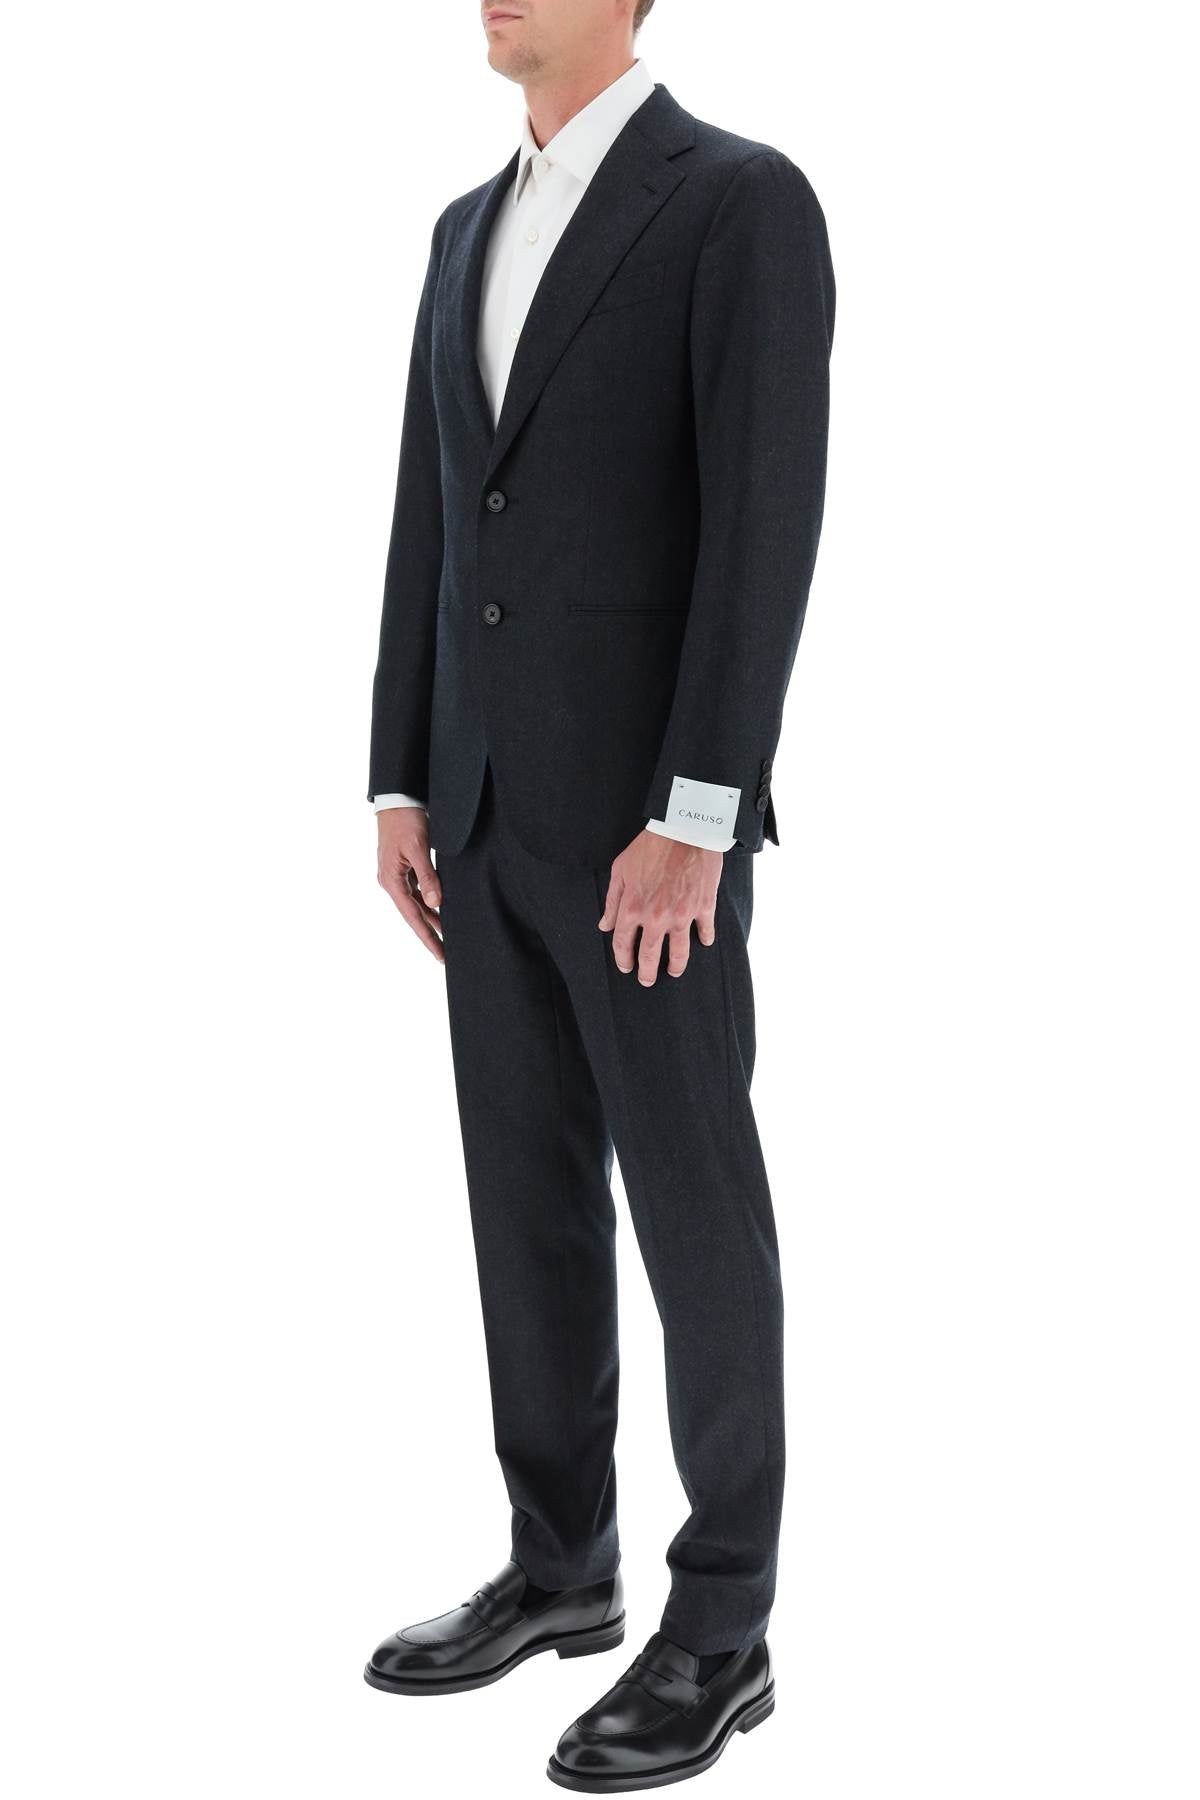 Caruso 'aida' wool suit-3